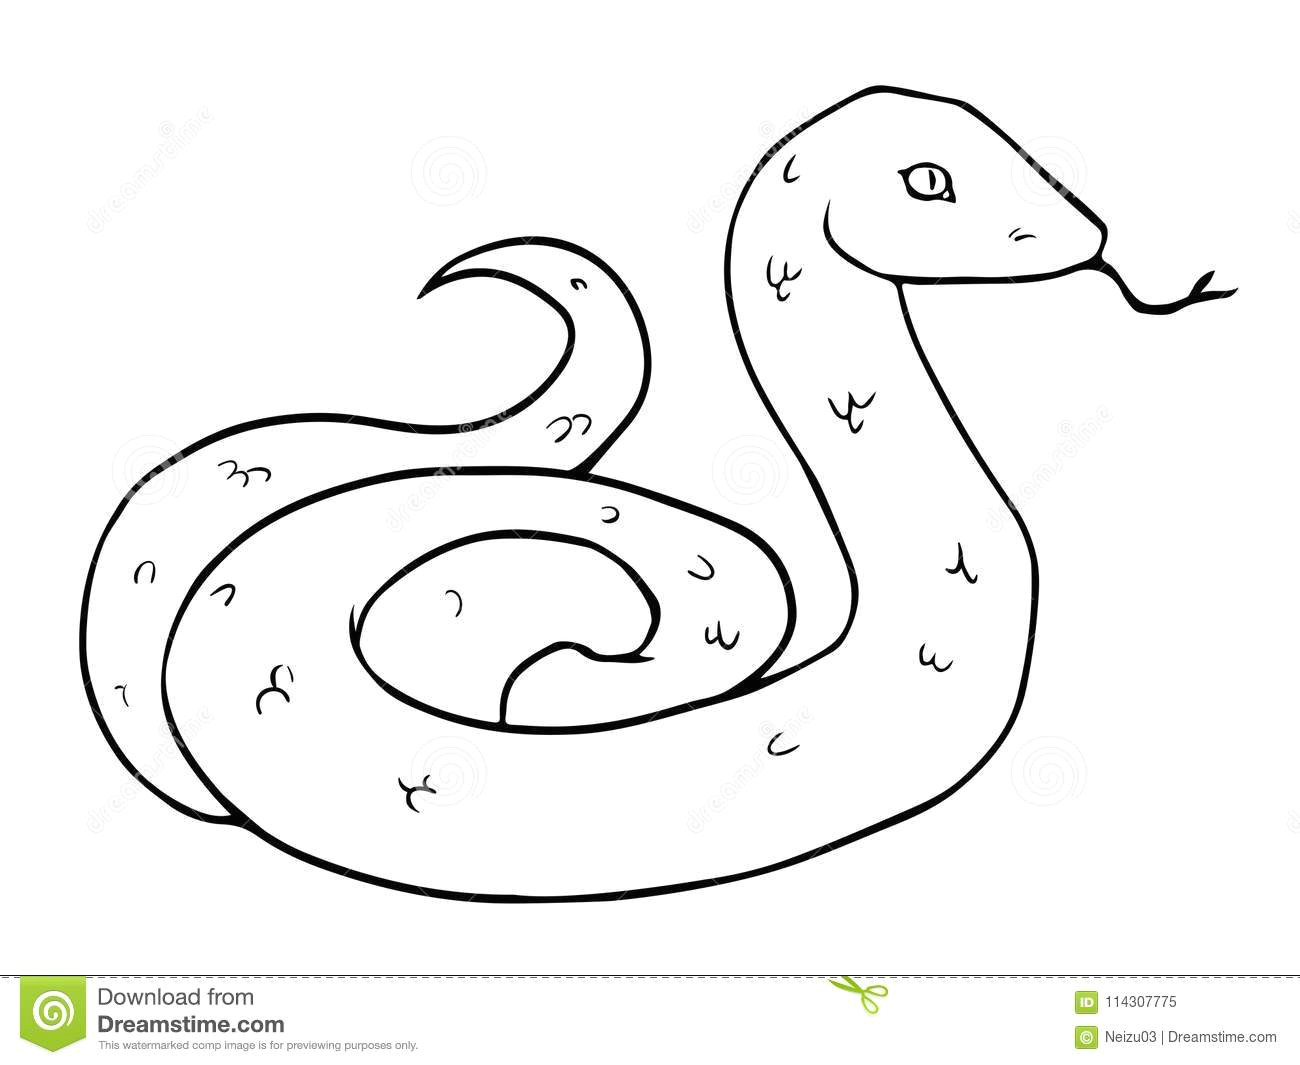 cartoon snake hissing black and white illustration of reptile for coloring book